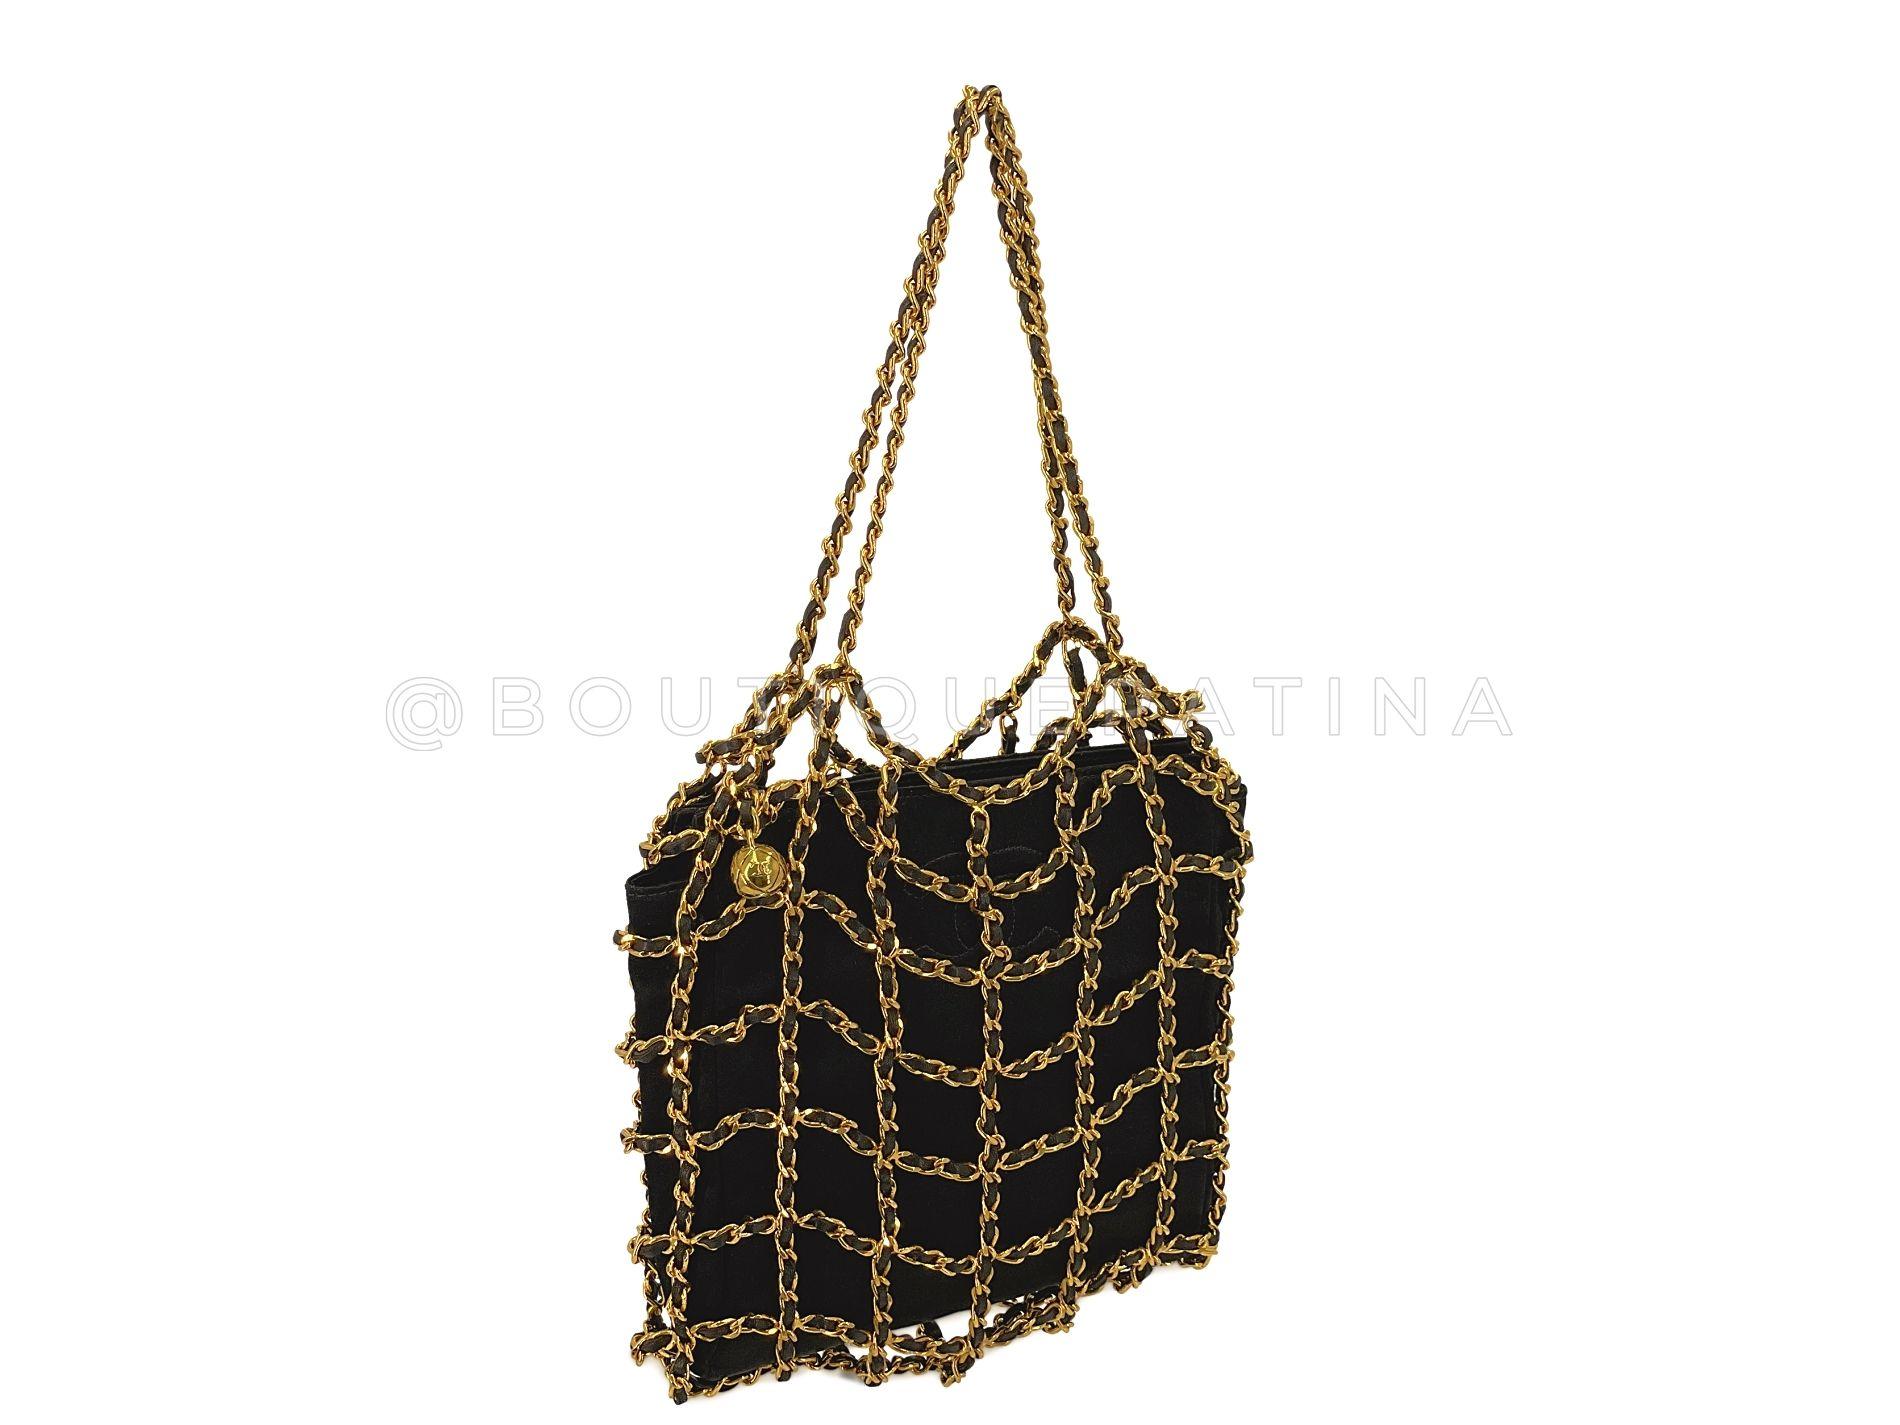 Store item: 68049
Rare Chanel 1994 Miniature Caged Silk Evening Bag 24k GHW is a very rare, very special evening bag, a minaudiere that came before them all - 30 years ago in 1994.

A small black silk satchel, in the smallest evening bag size